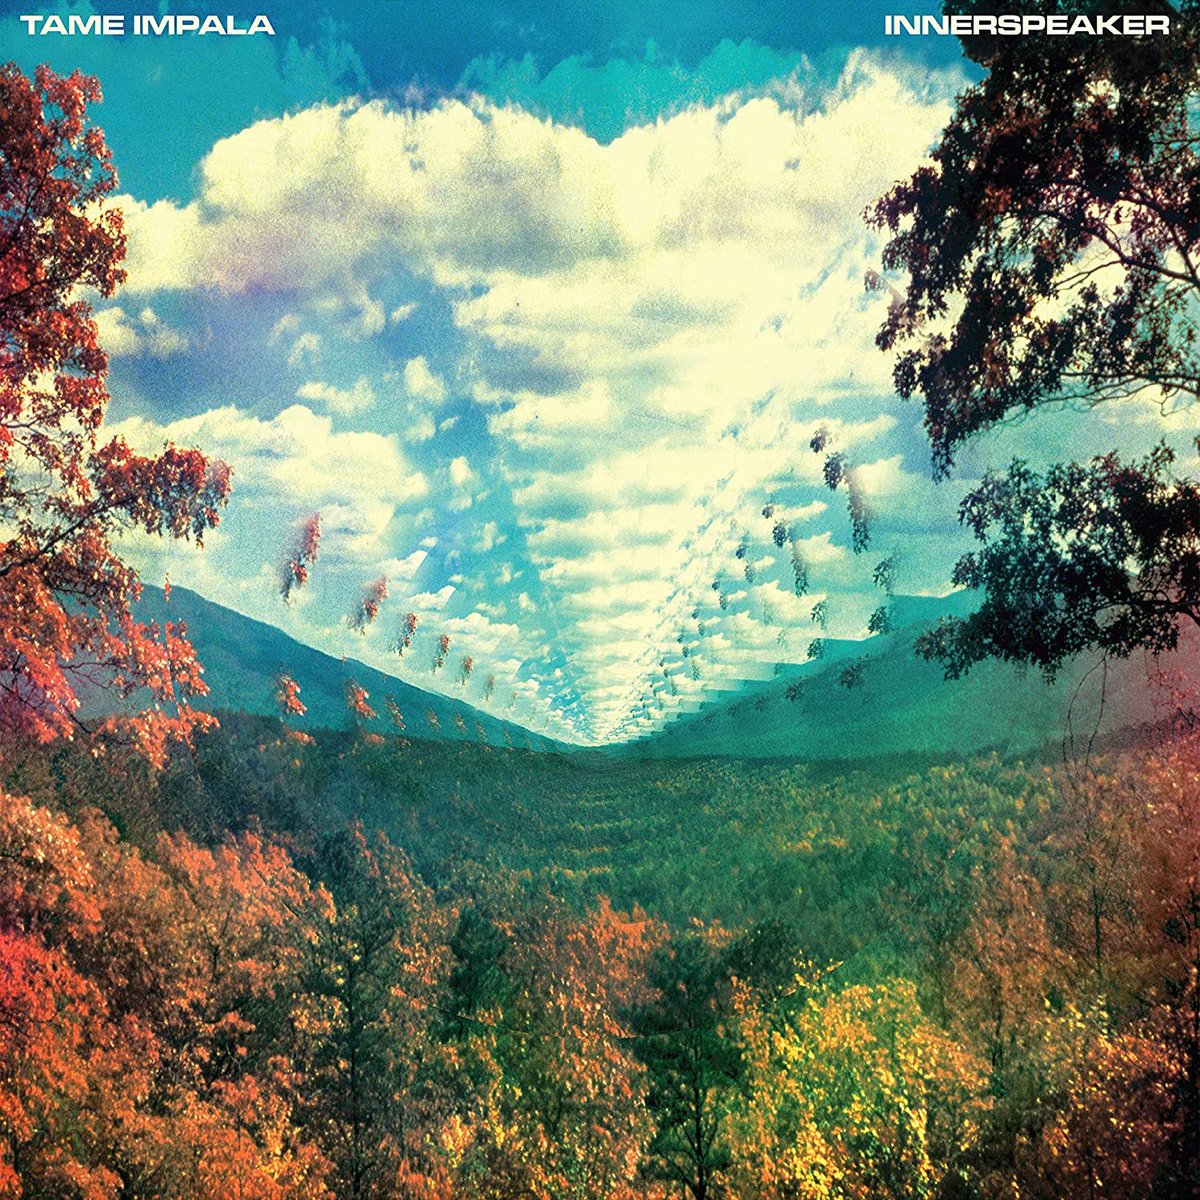 Album 1: Innerspeaker (2010)               Tame Impala’s debut album brings back 60s psychedelic rock. It’s very guitar heavy and “rough” sounding. Themes of his inner conflict and isolation run through this album, you gain insight to an introverted mind.